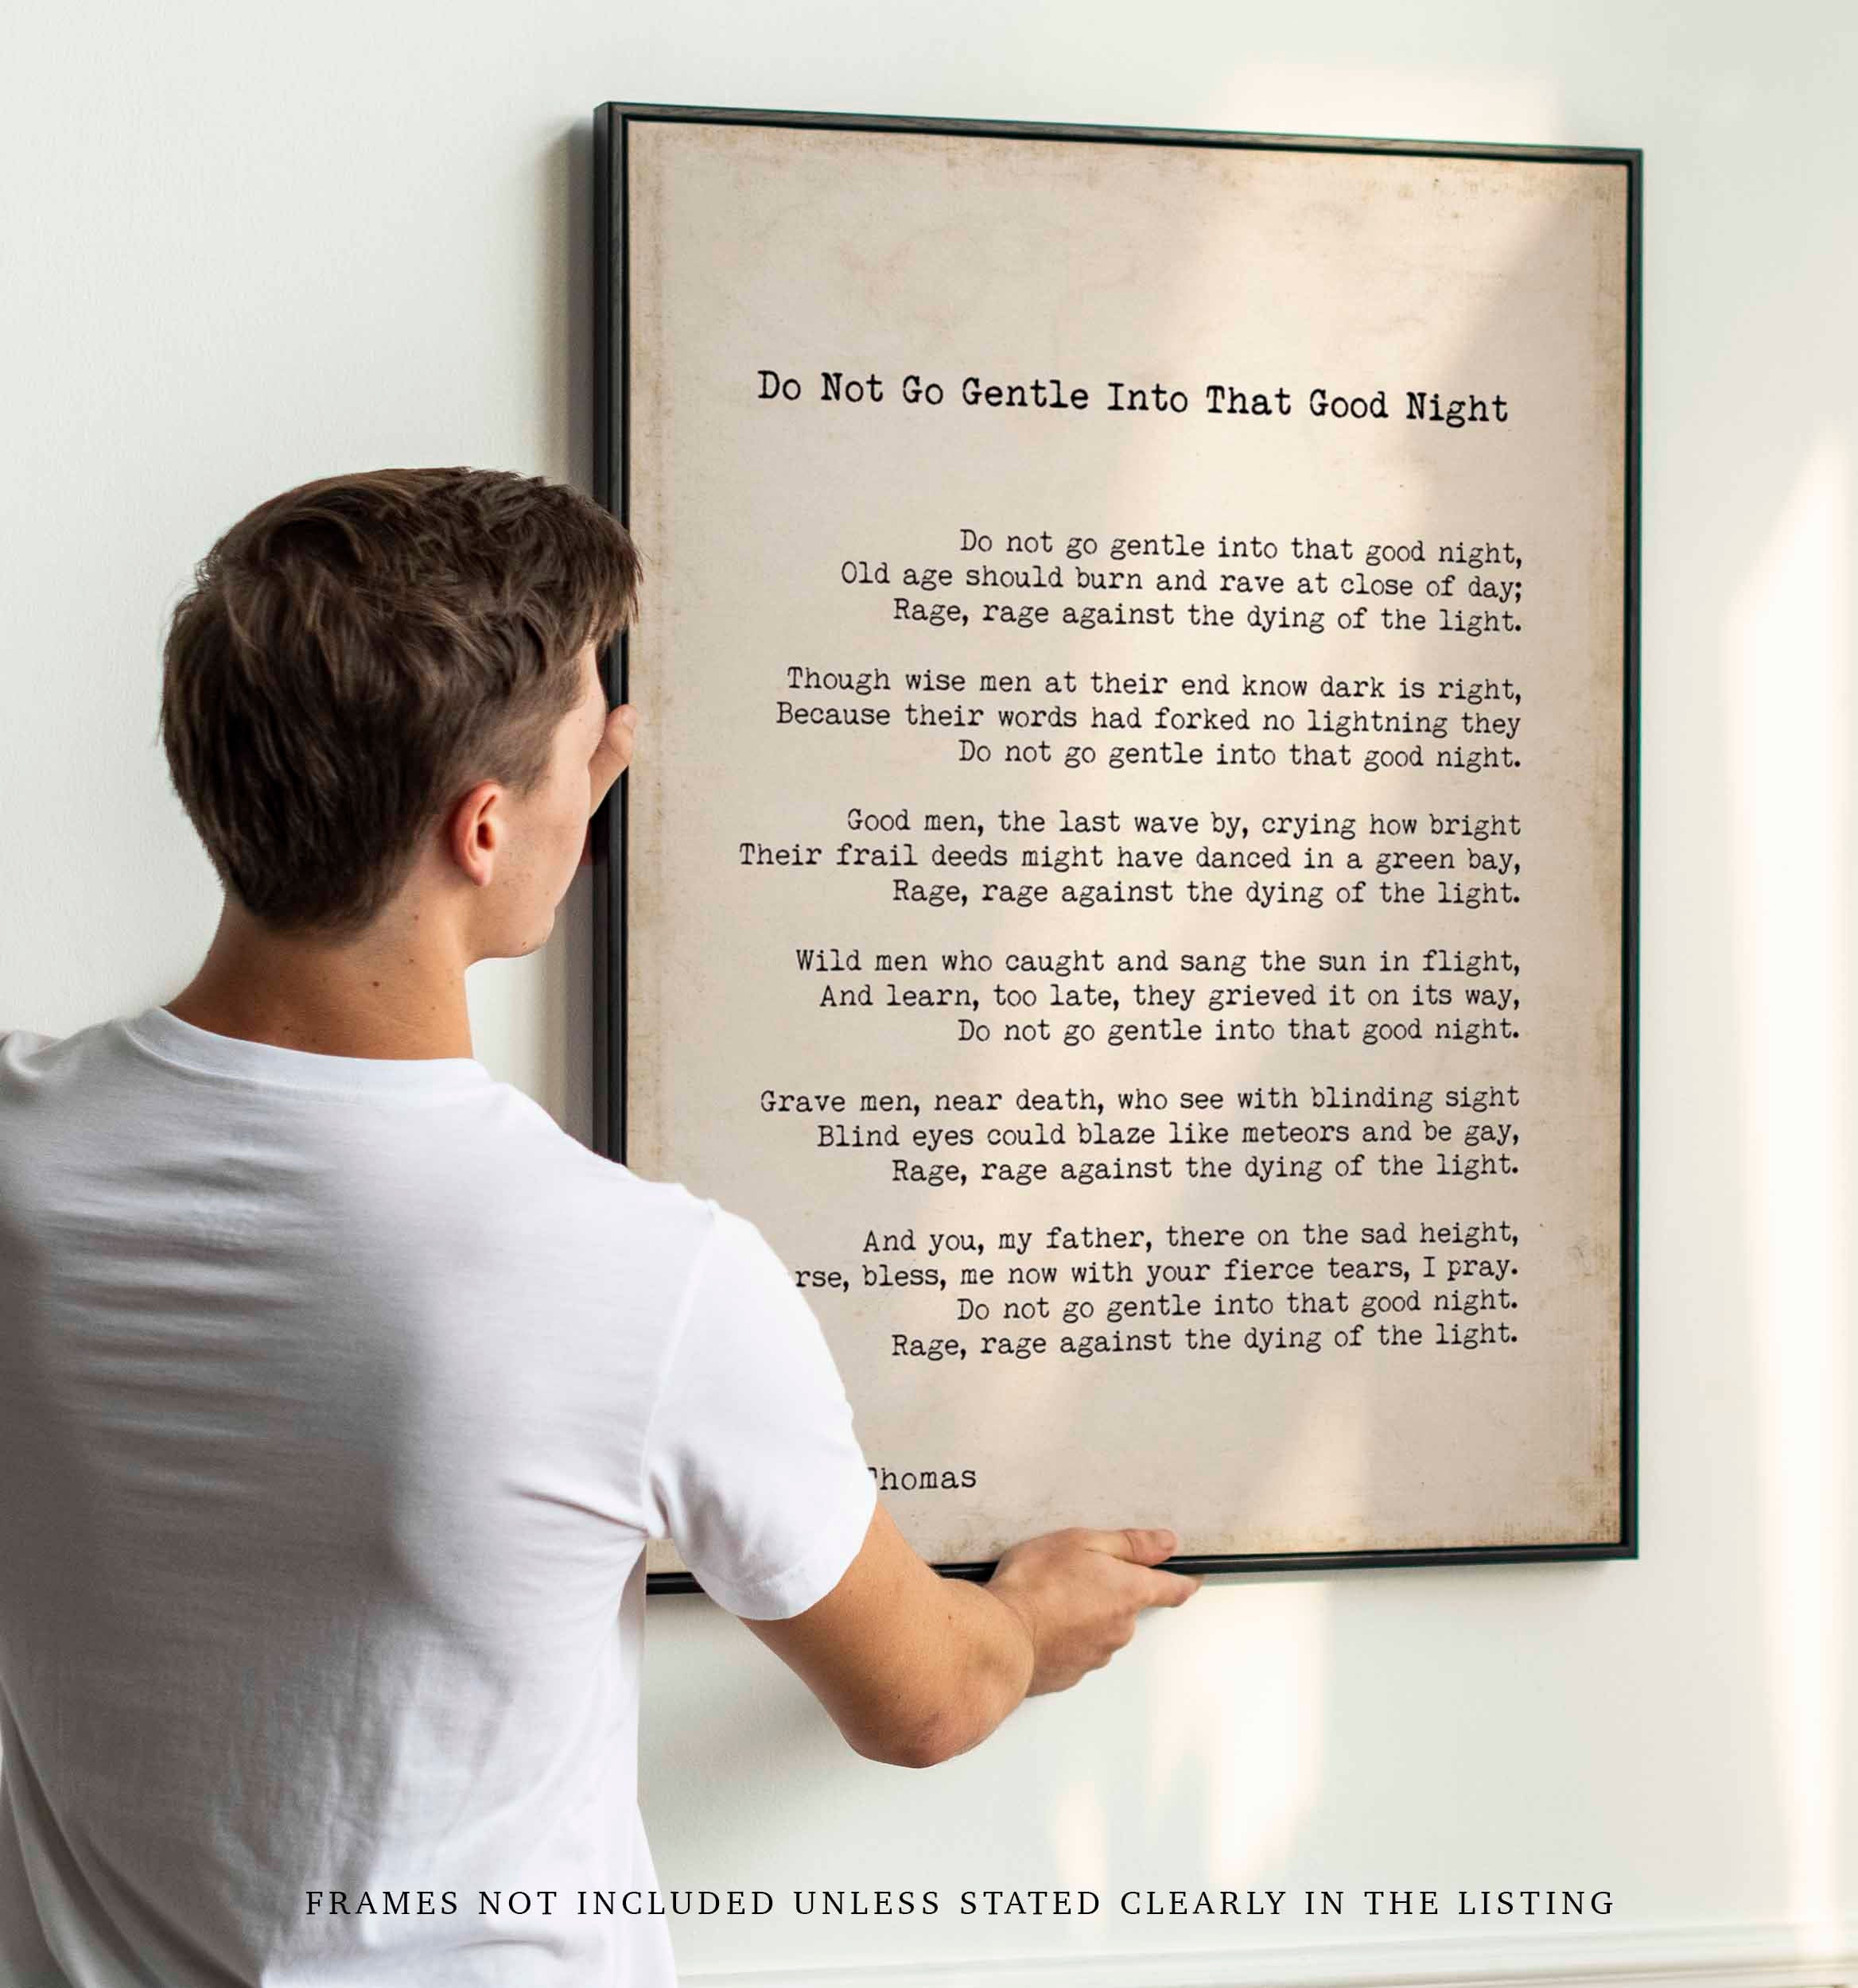 FRAMED Dylan Thomas Poem Print, Do Not Go Gentle Poetry Quote Art in Black & White for Home Wall Decor 8x10 - 24x36